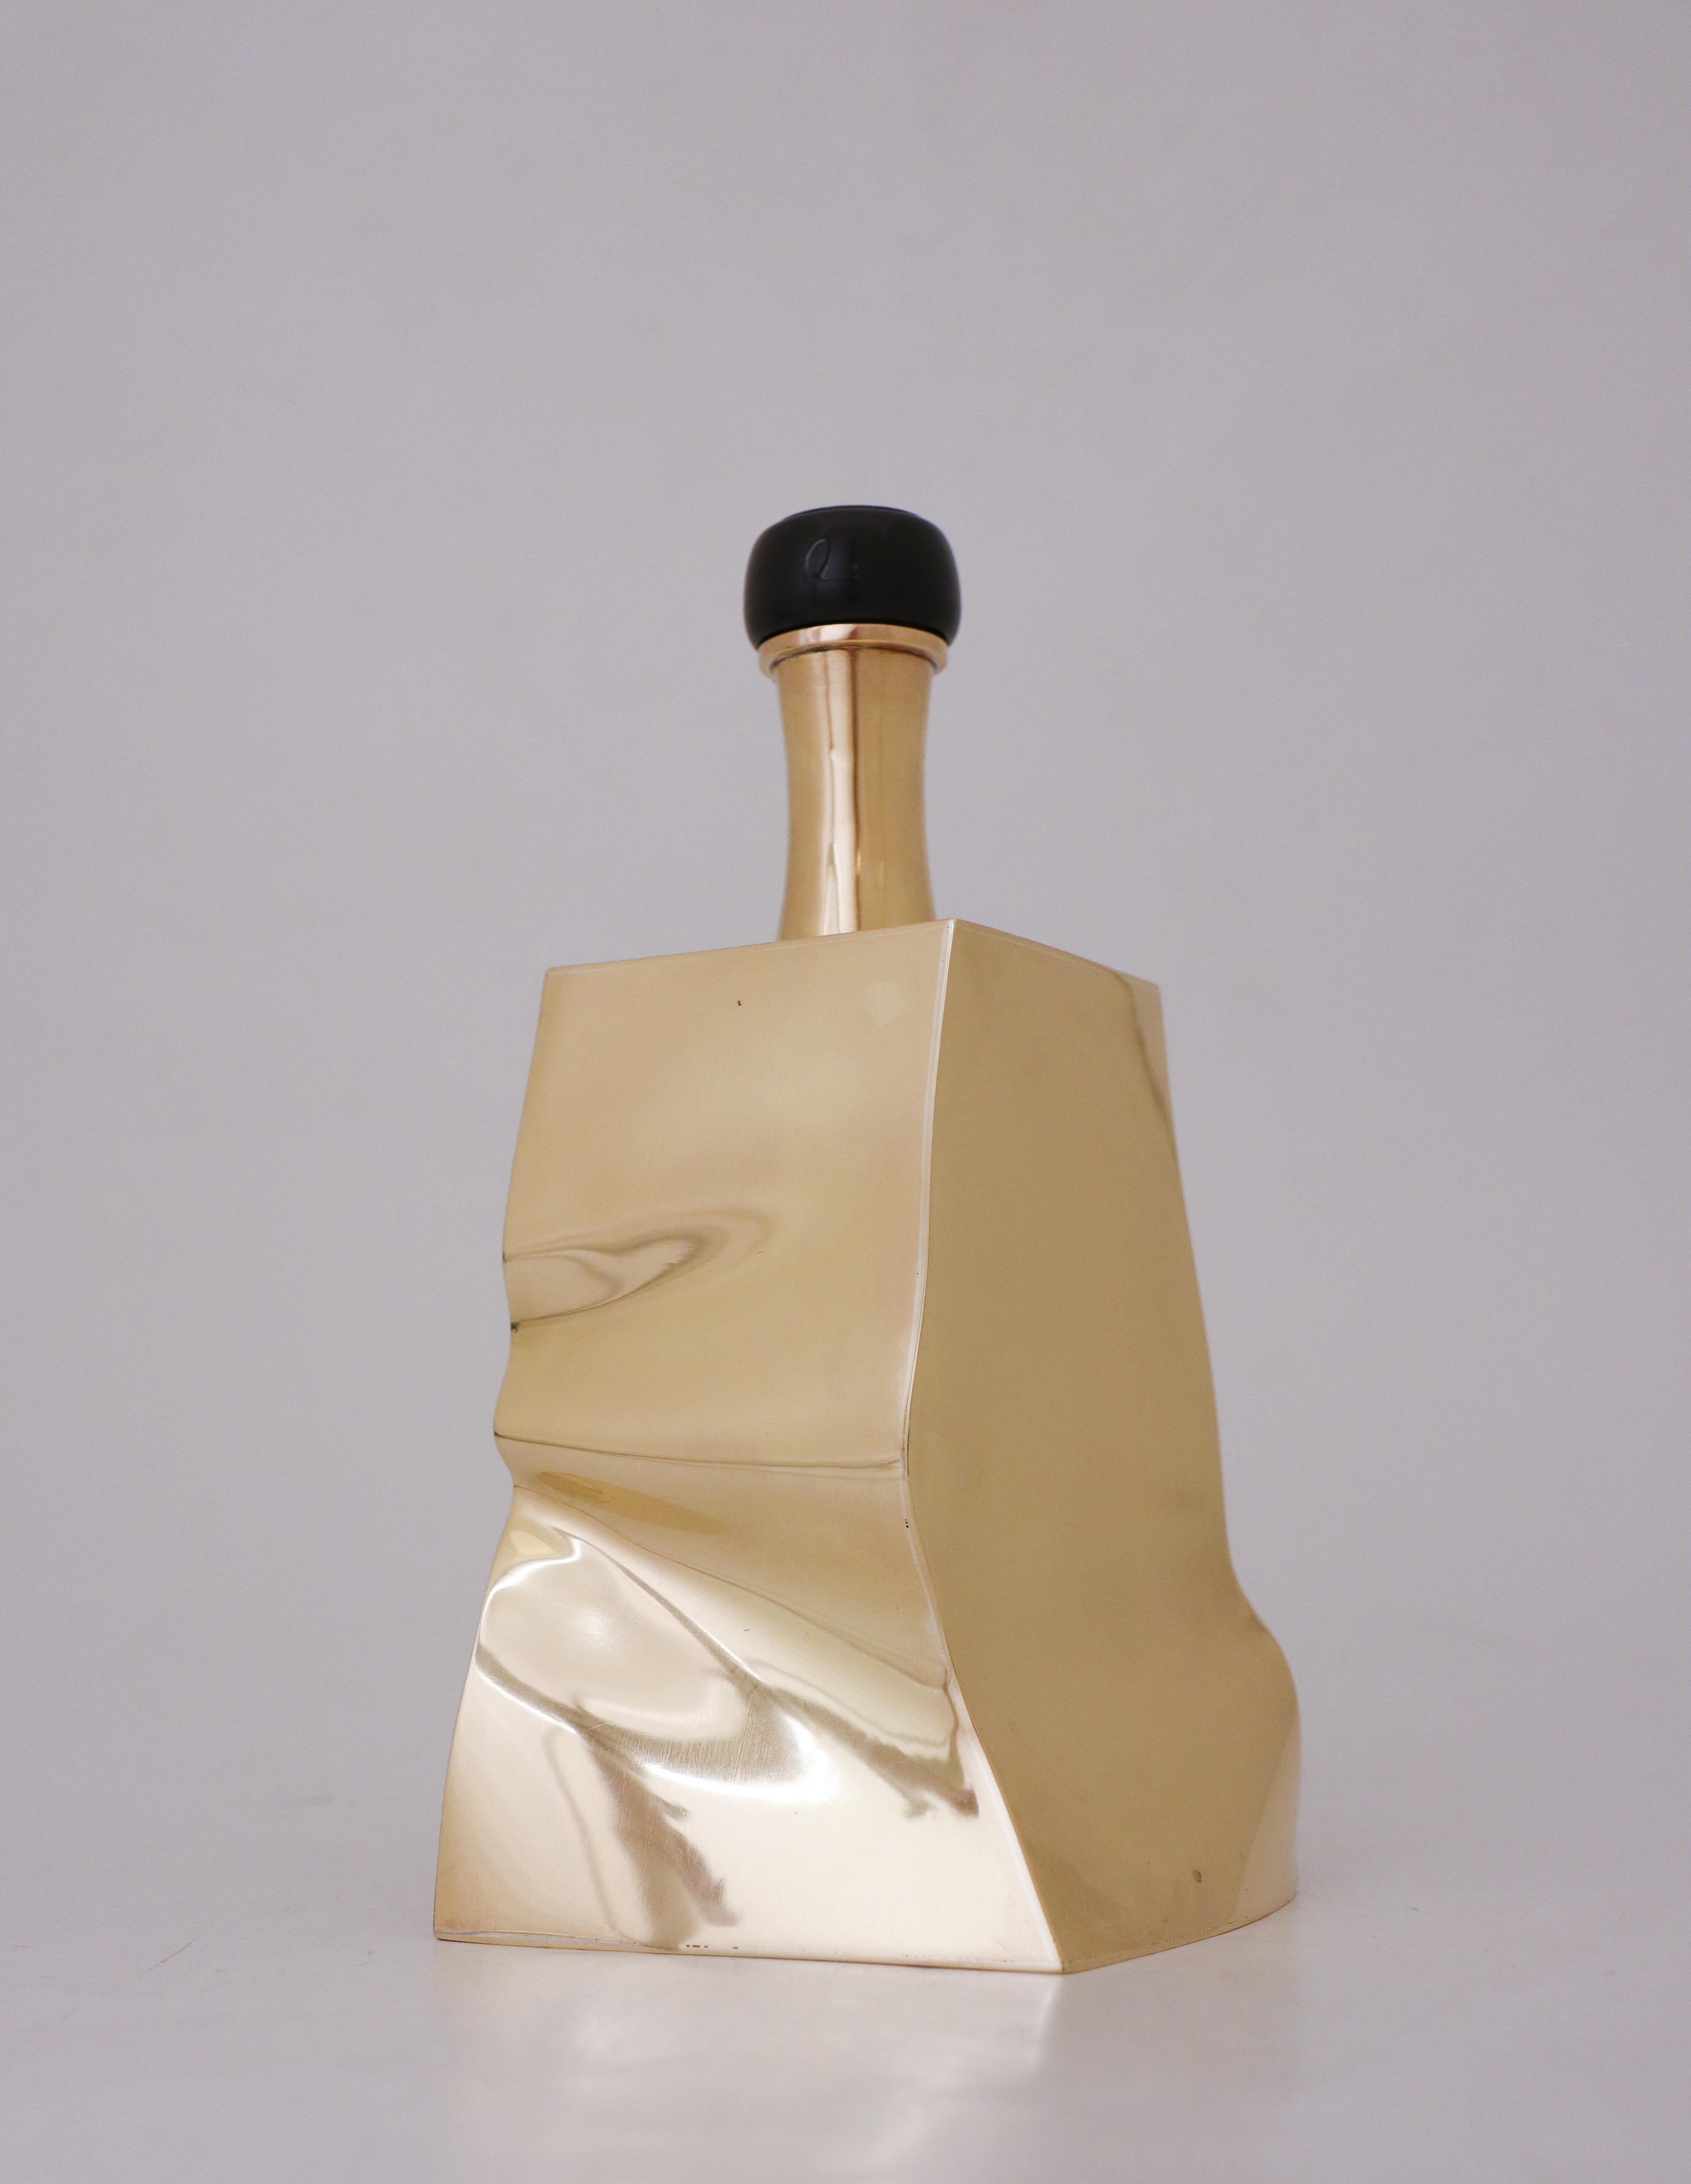 A lovely decanter designed by Per Myrström, Sweden in the 1974. It is 20 cm high and in very good condition except from some minor marks and scratches. It has a stunning shape and is made of brass with a plastic stopper.